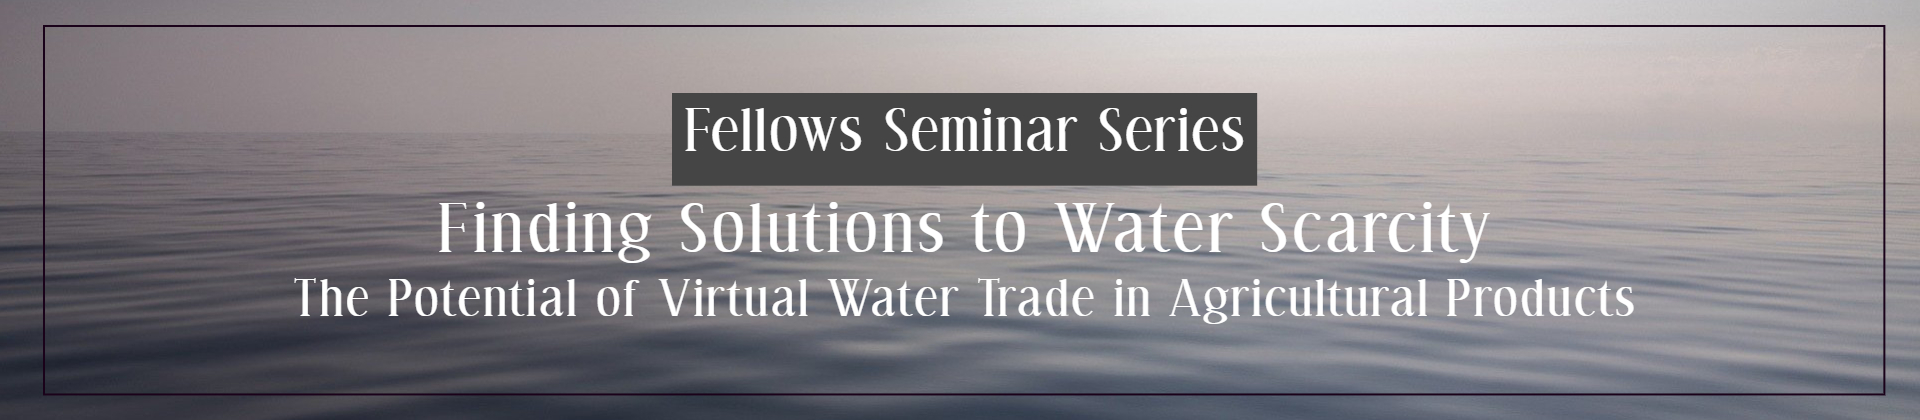 Fellows Seminar Series | Finding Solutions to Water Scarcity: The Potential of Virtual Water Trade in Agricultural Products